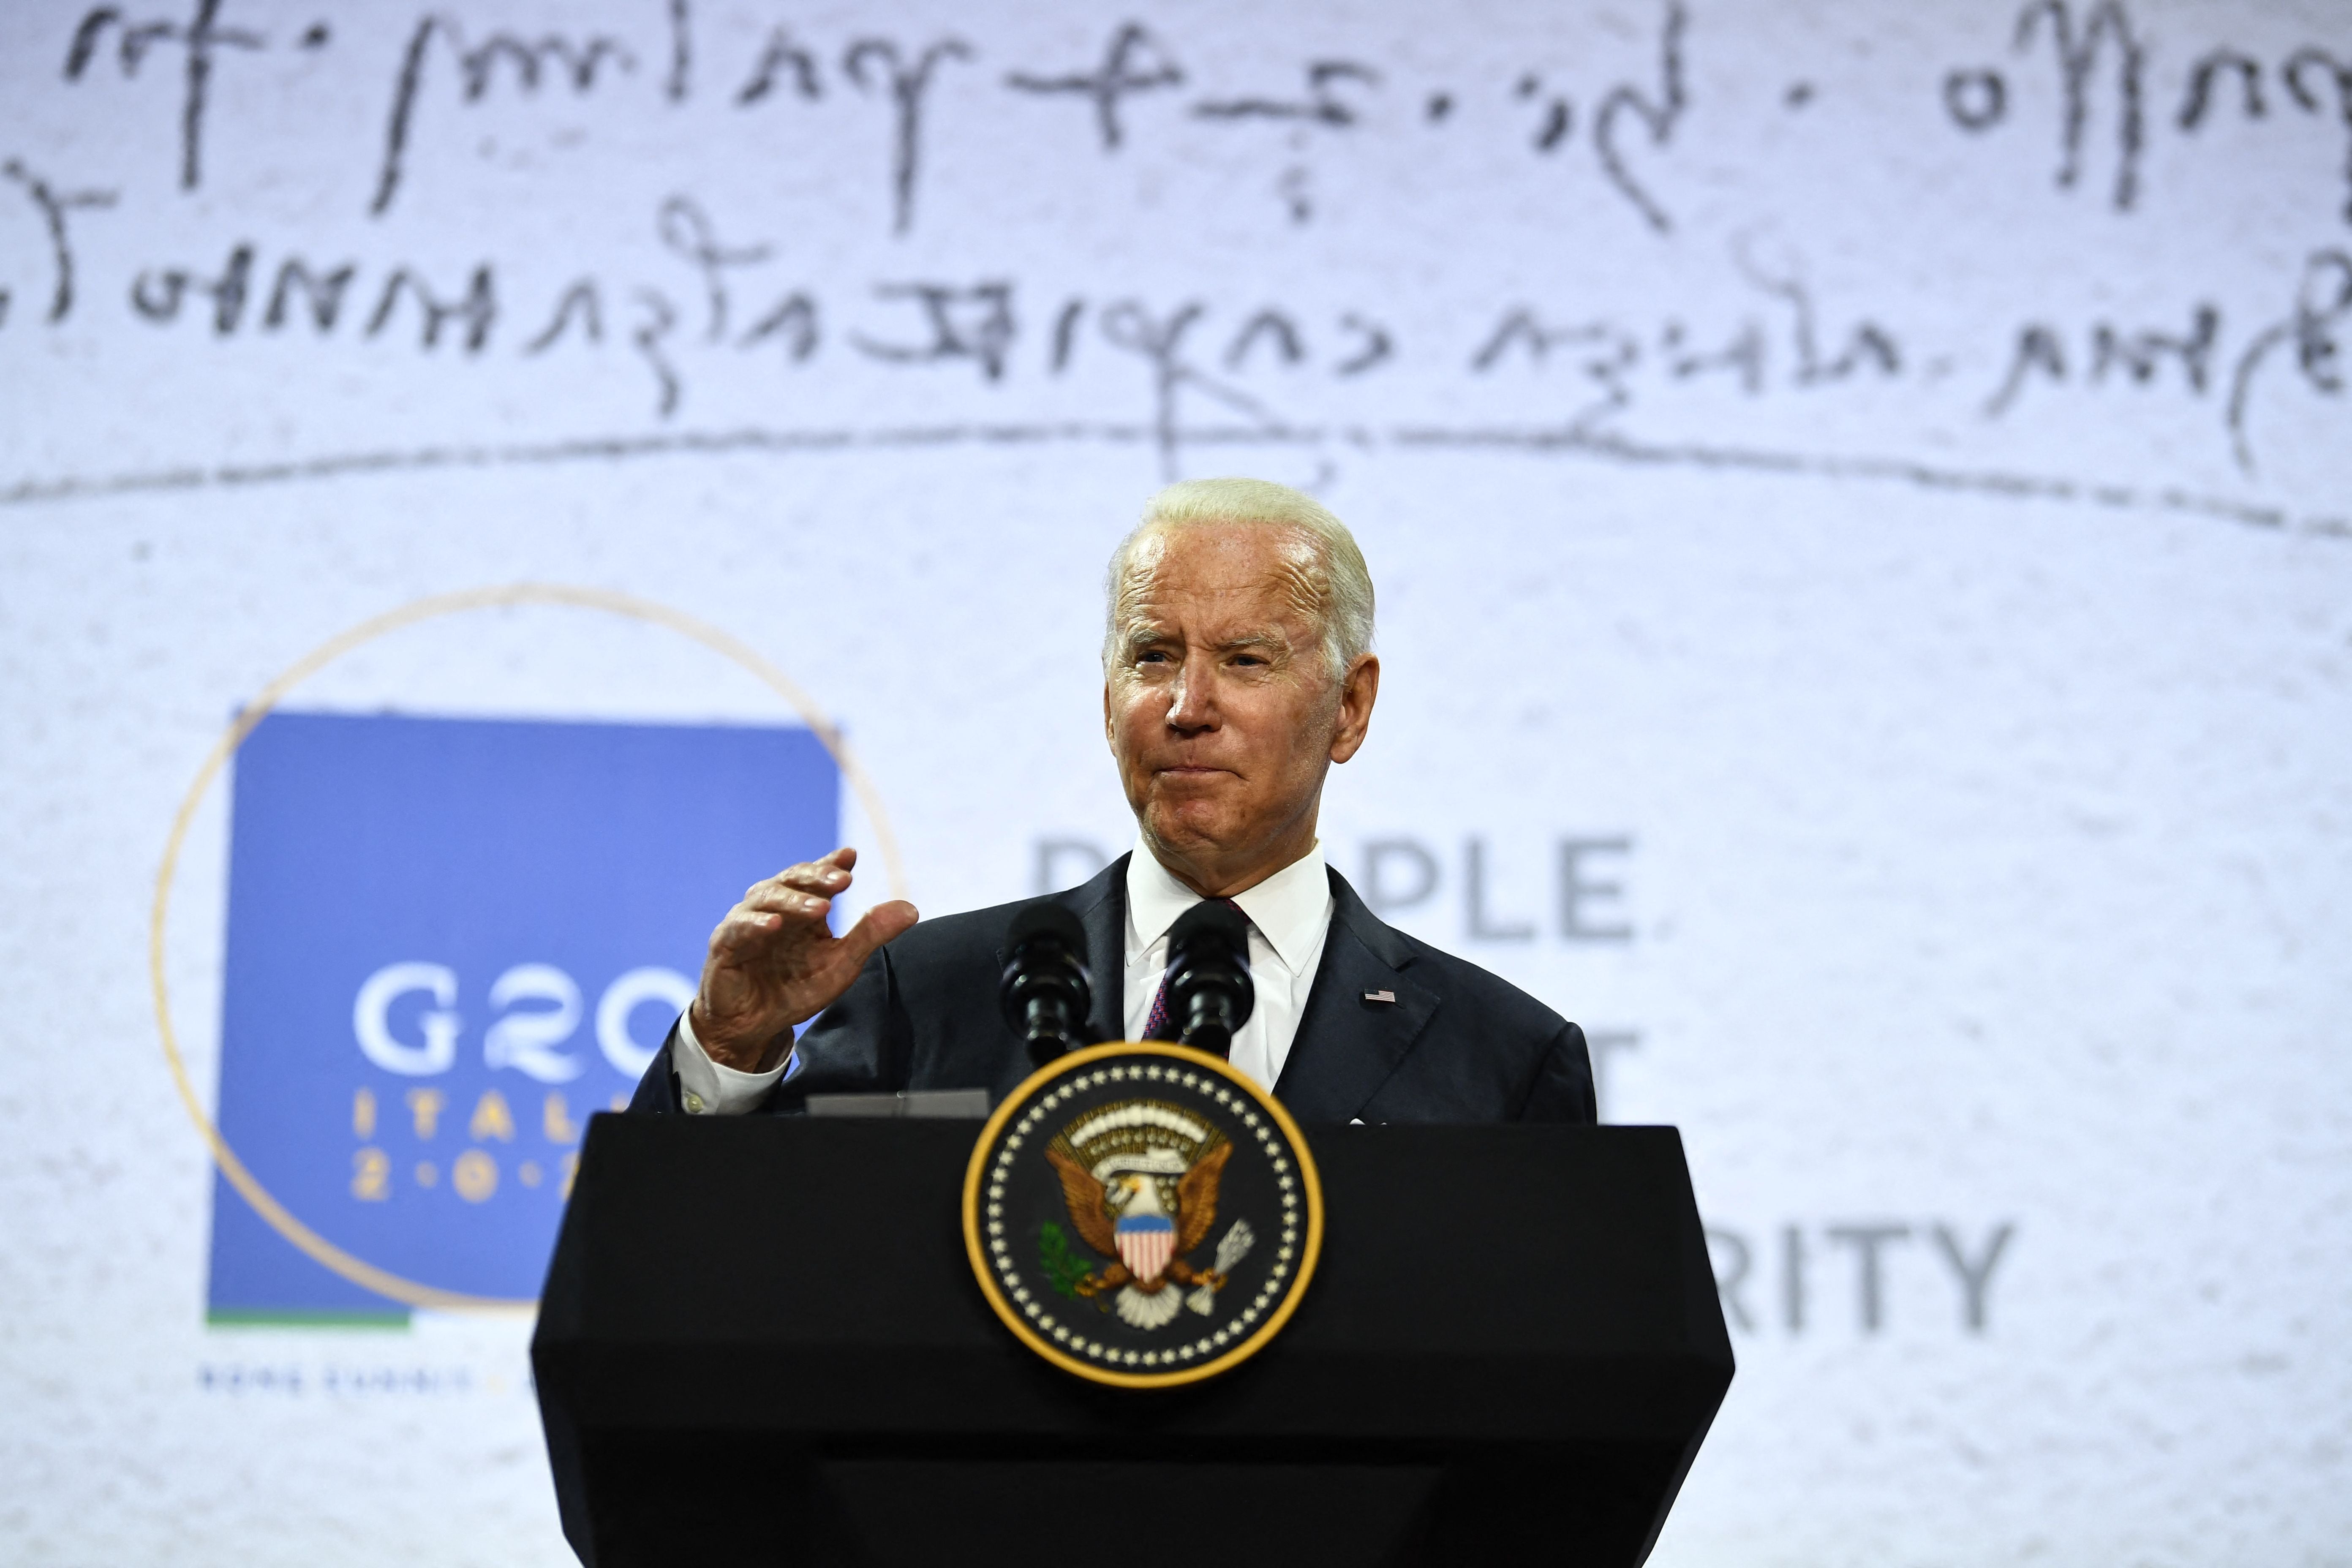 US President Joe Biden addresses a press conference at the end of the G20 of World Leaders Summit on 31 October 2021 at the convention center "La Nuvola" in the EUR district of Rome